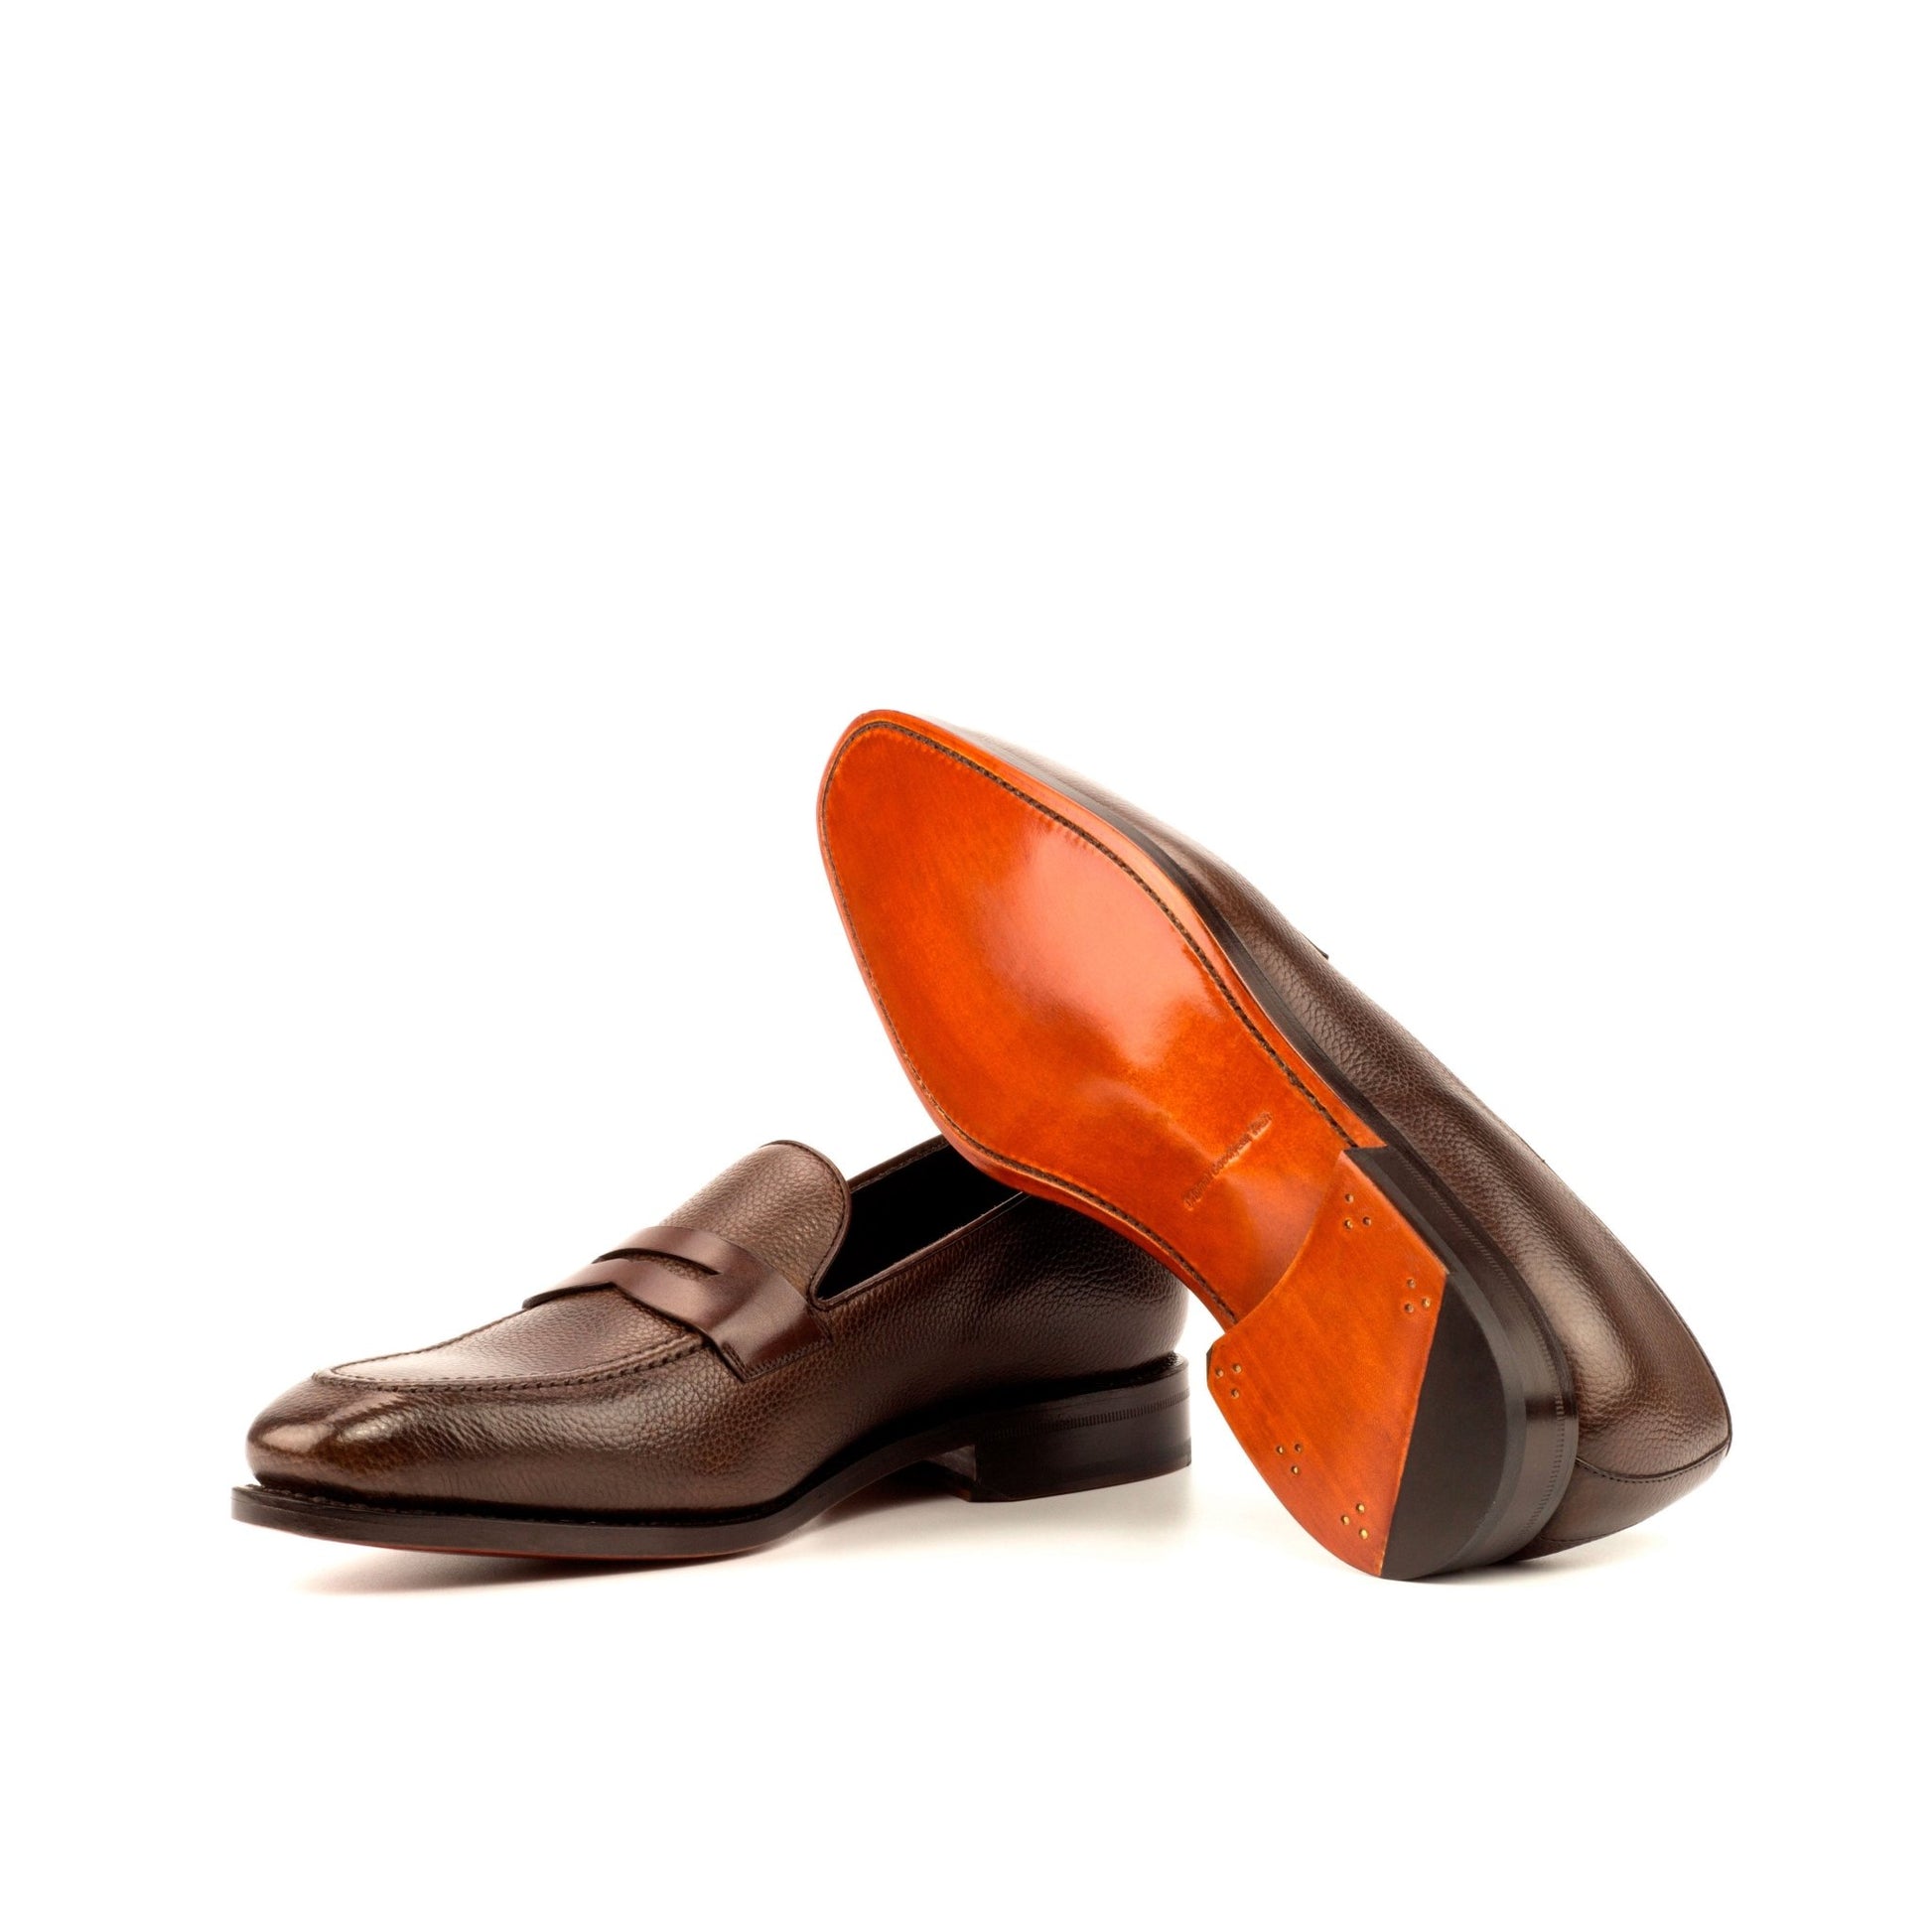 Penny Loafer in Dark Brown Box Calf - Zatorres | Free Shipping on orders over $200